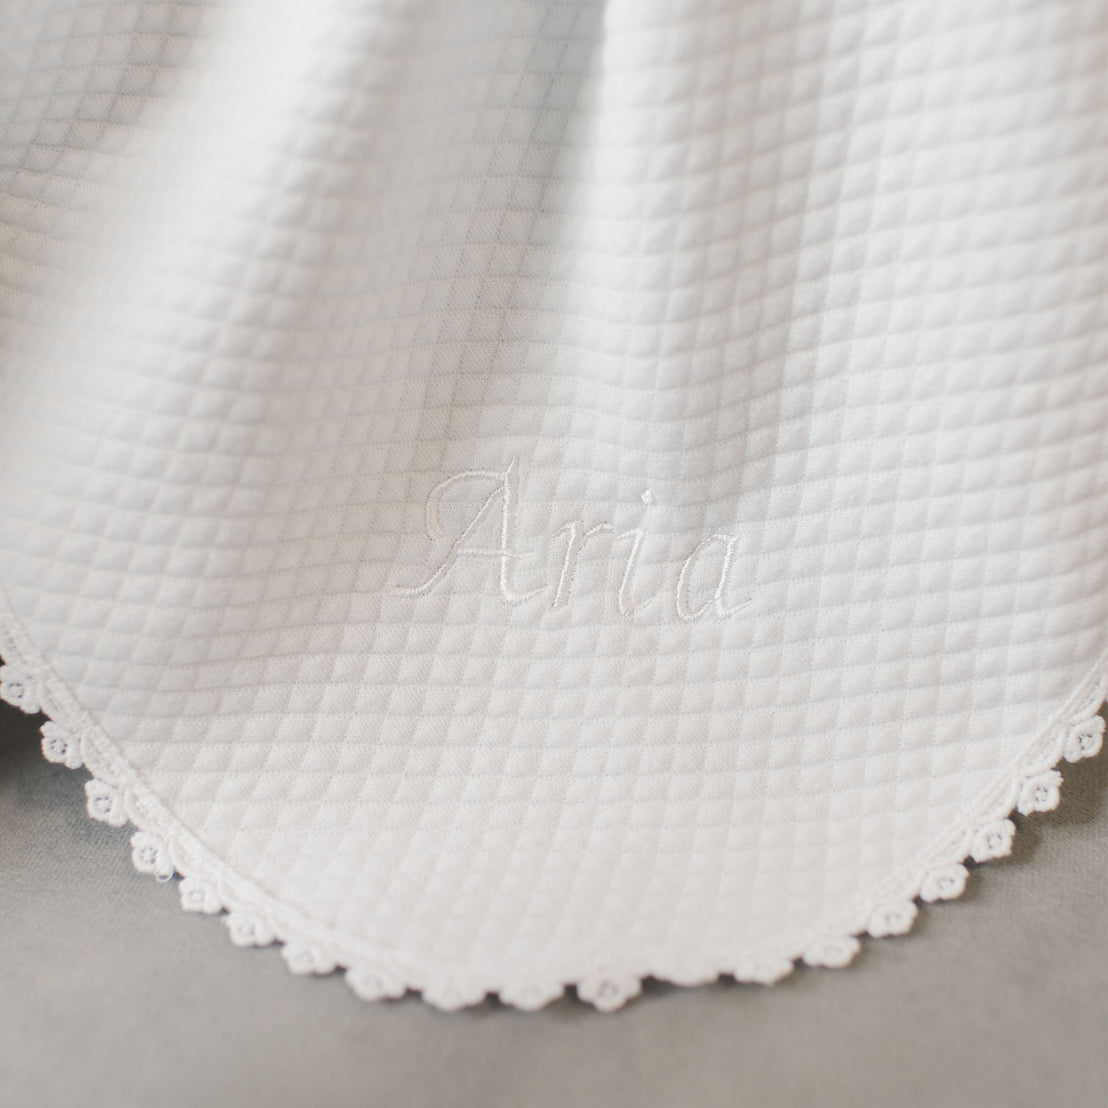 Close-up of a white baby blanket with the product name "Aria" embroidered in white, featuring a small, delicate lace trim along the edge and perfect as a Baptism accessory.